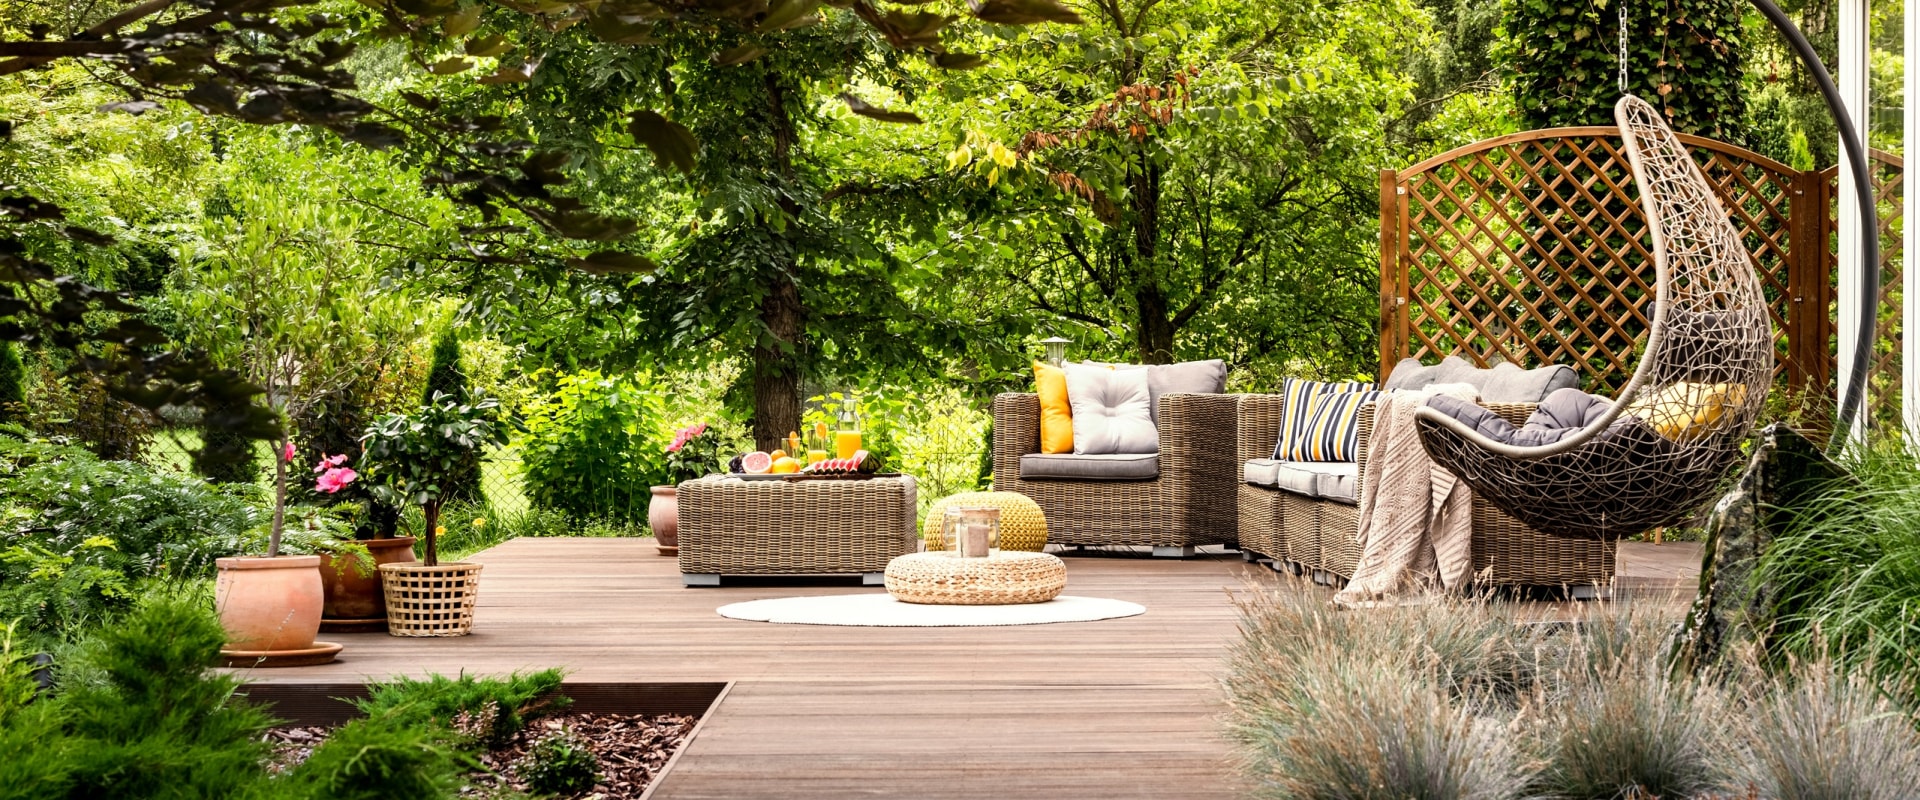 How to Maintain and Keep Your Outdoor Space Safe and Beautiful